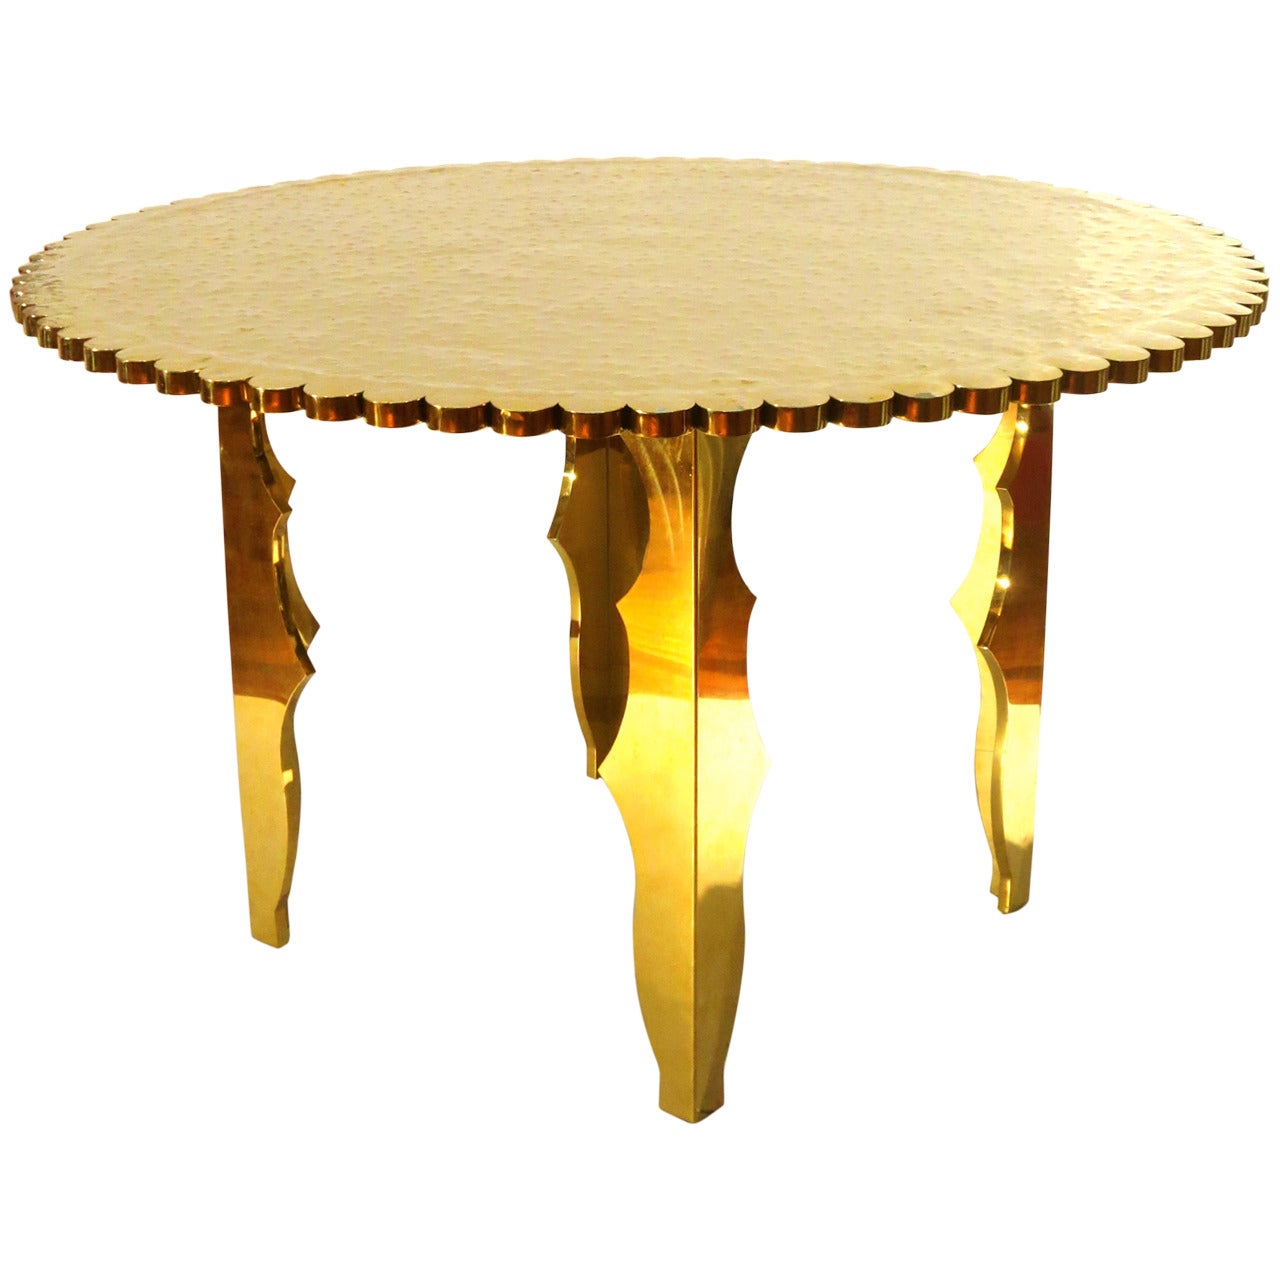 Monumental Large Brass Entry Table Hand-Hammered Top Scalloped Edge